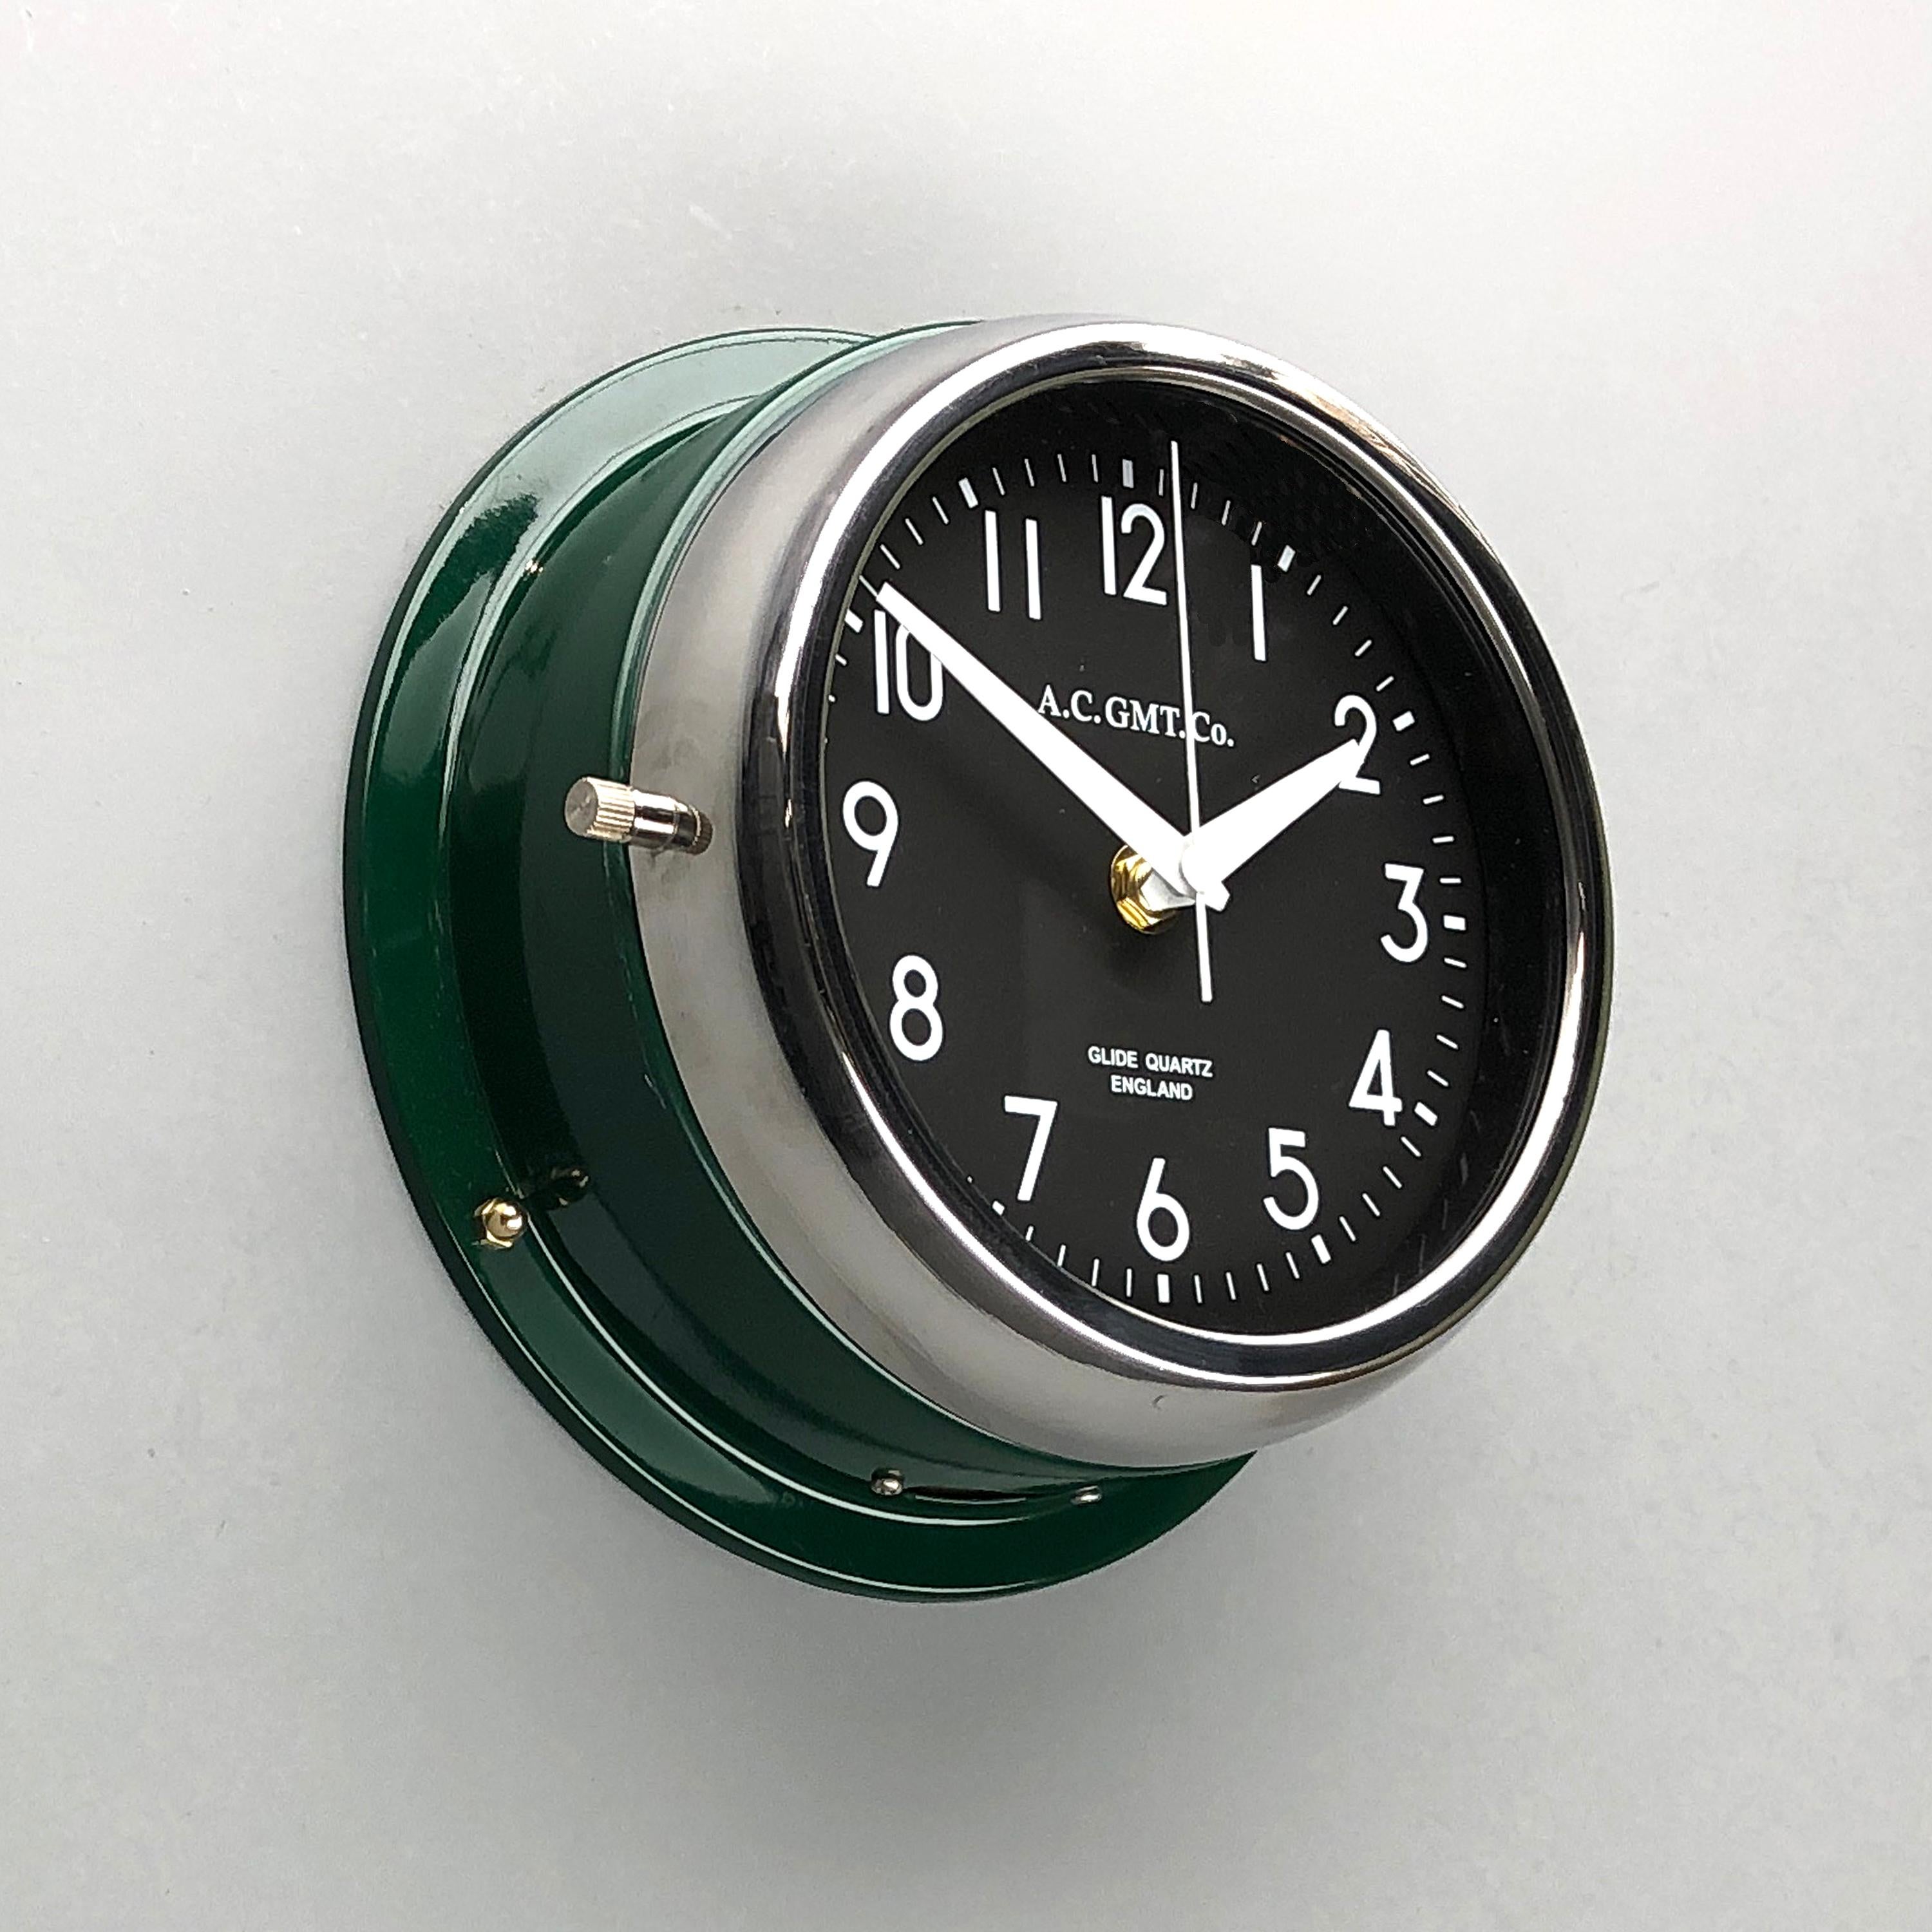 Rescued from industrial scrap yards and brought back to life in our UK workshop, our expert process allows us to create a high quality clock of luxury standards. 
At A.C GMT Co. we apply new paint finishes or lustrous copper and bronze to the clock